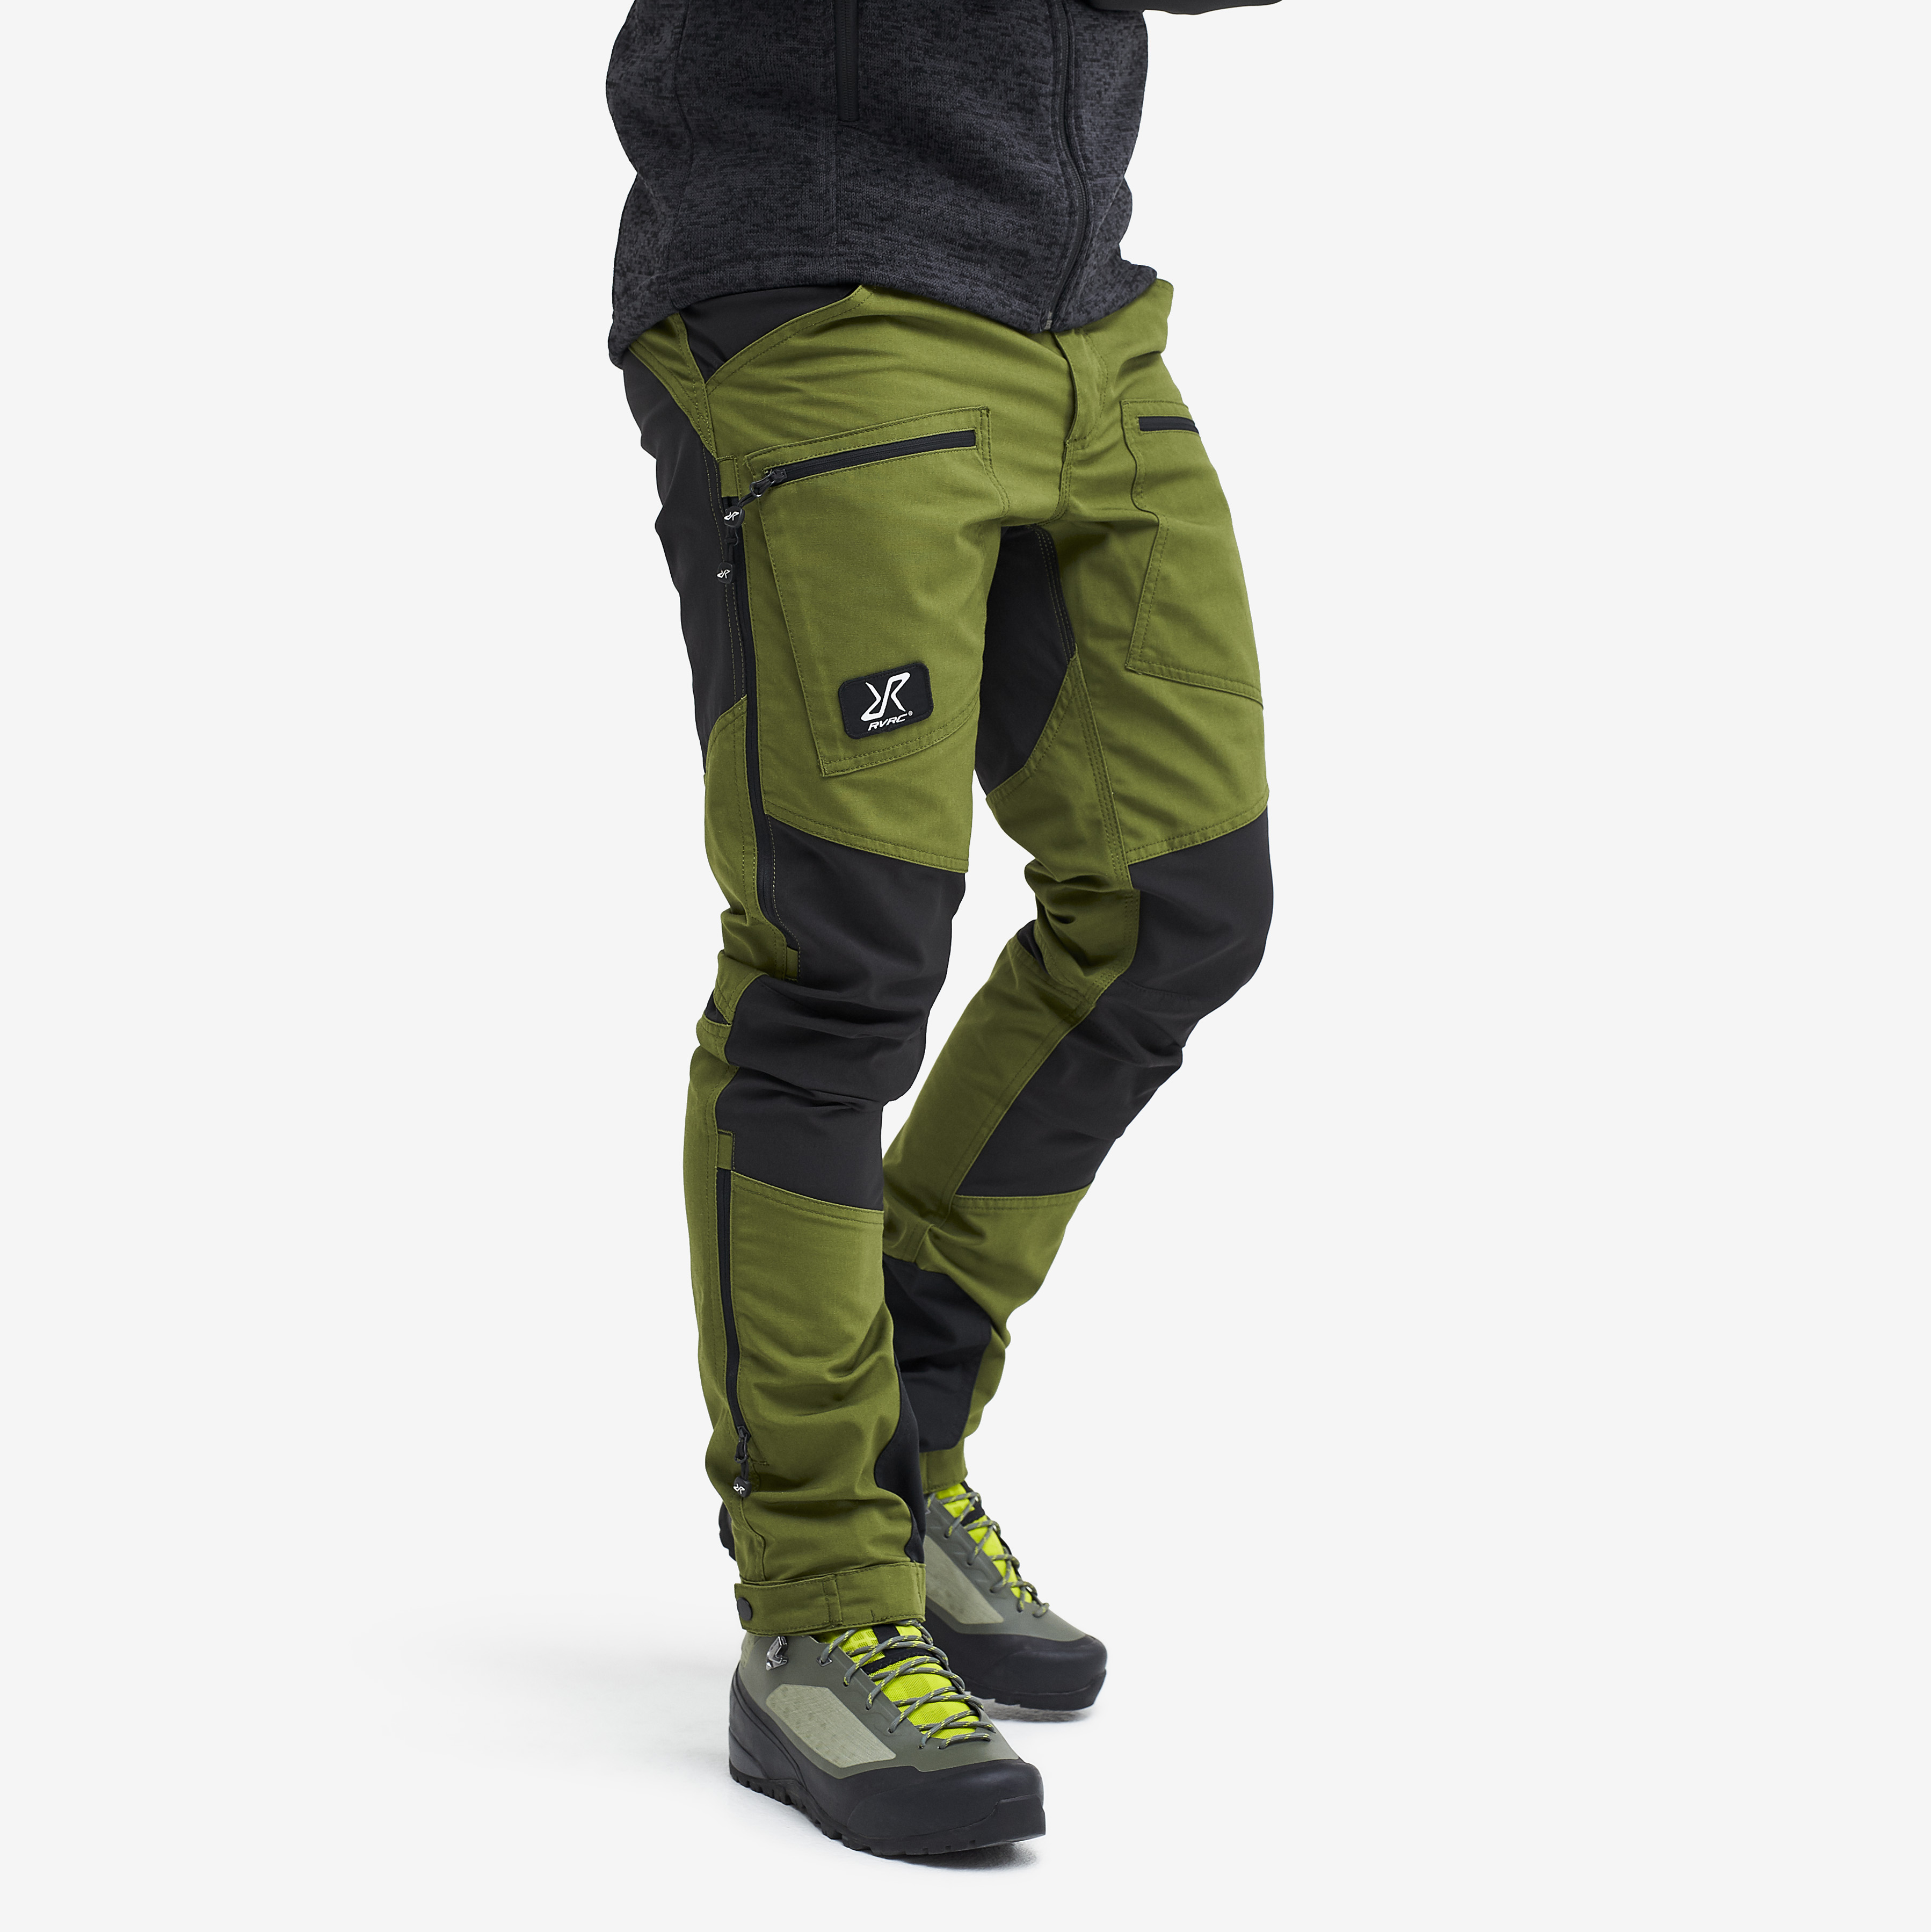 Nordwand Pro Rescue hiking trousers for men in green